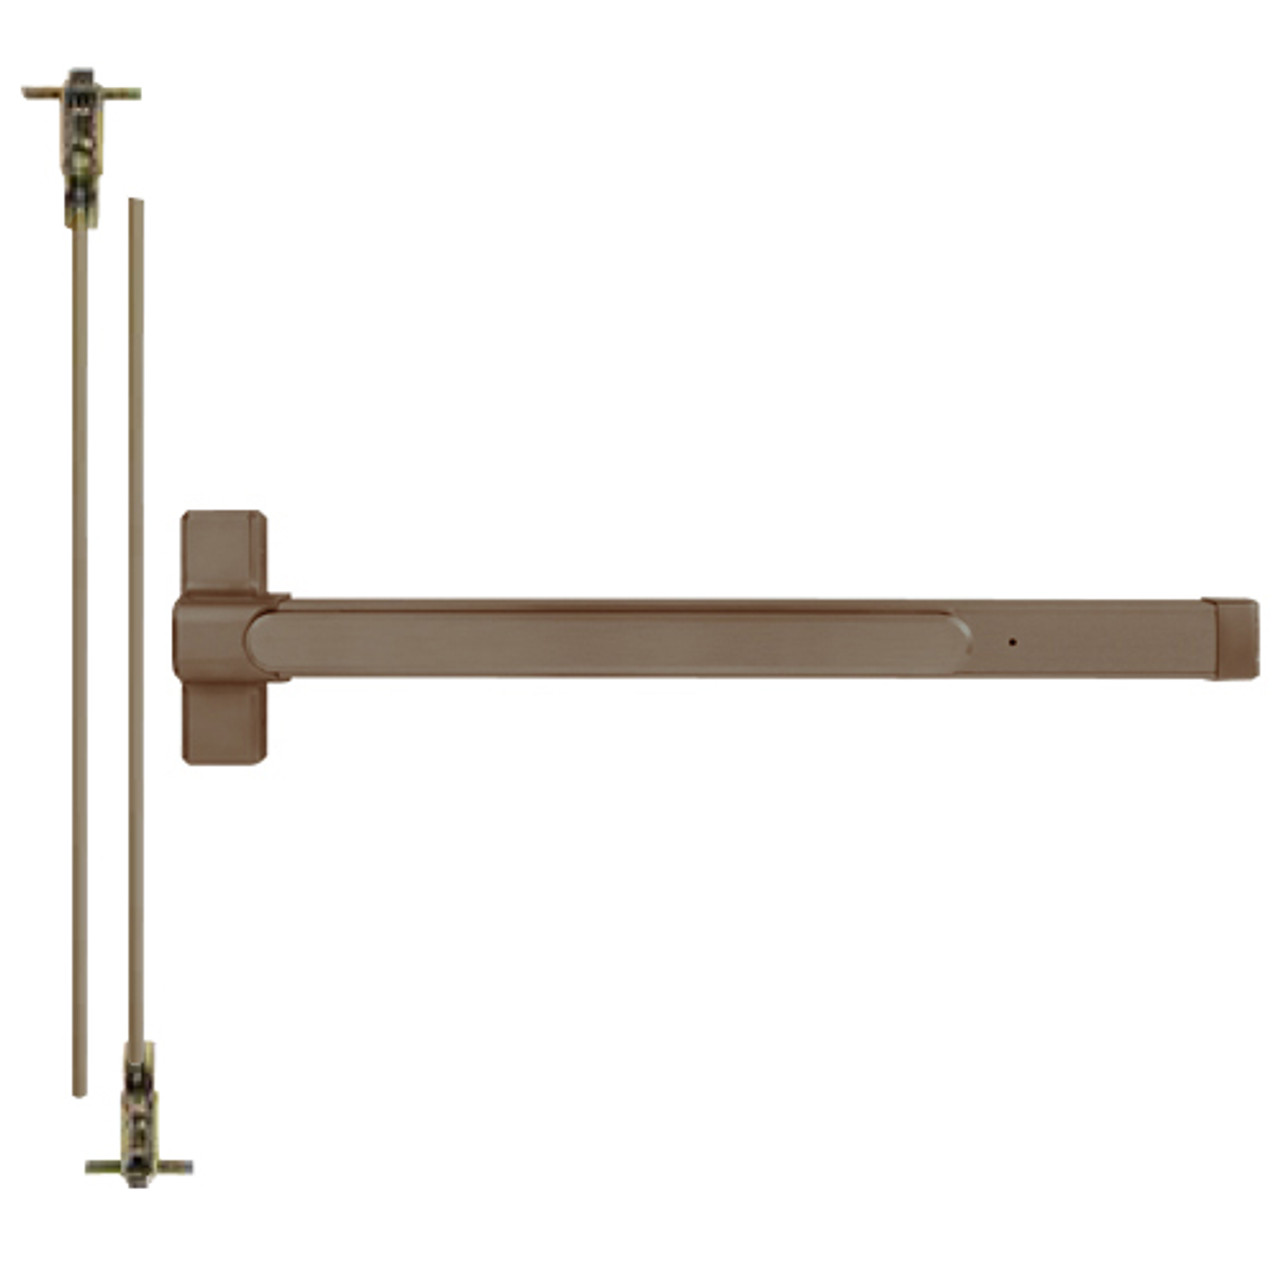 QED125-48-8-313AN-LC Stanley QED100 Series Heavy Duty Concealed Vertical Rod Cylinder Dog Exit Device in Anodized Duranodic Bronze Finish